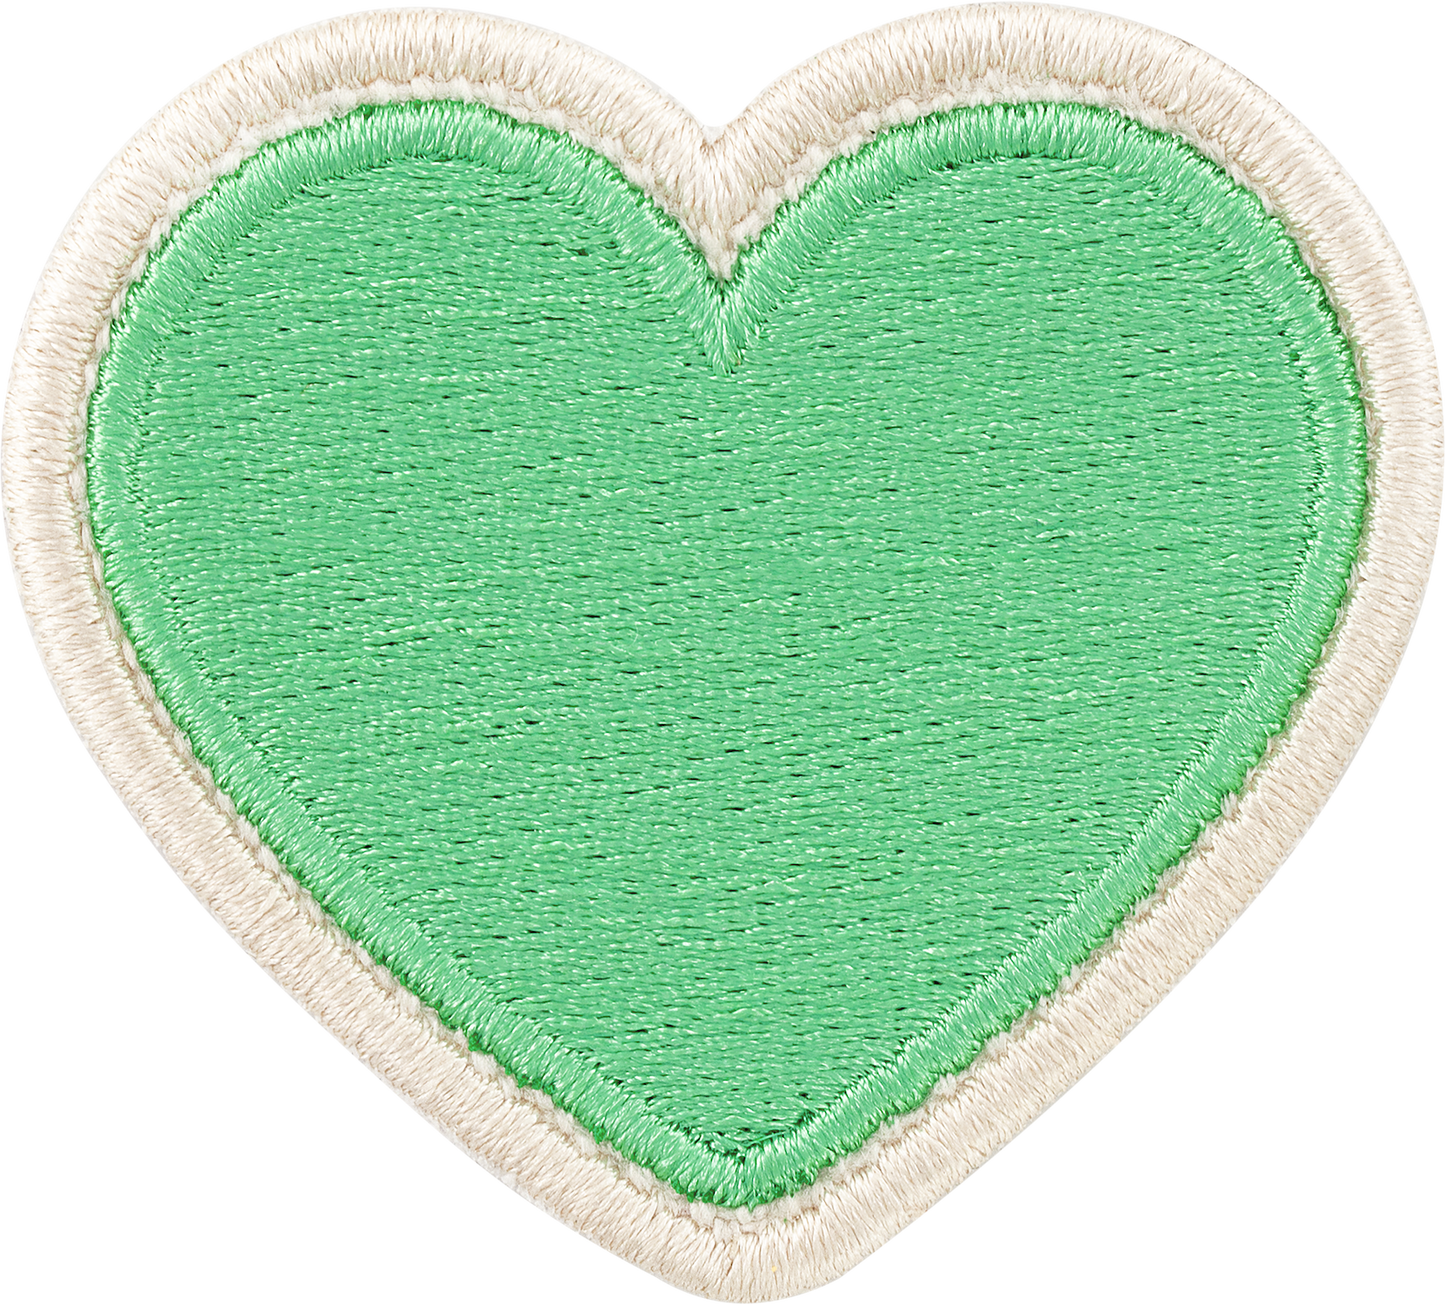 Avocado Rolled Embroidery Heart Patch